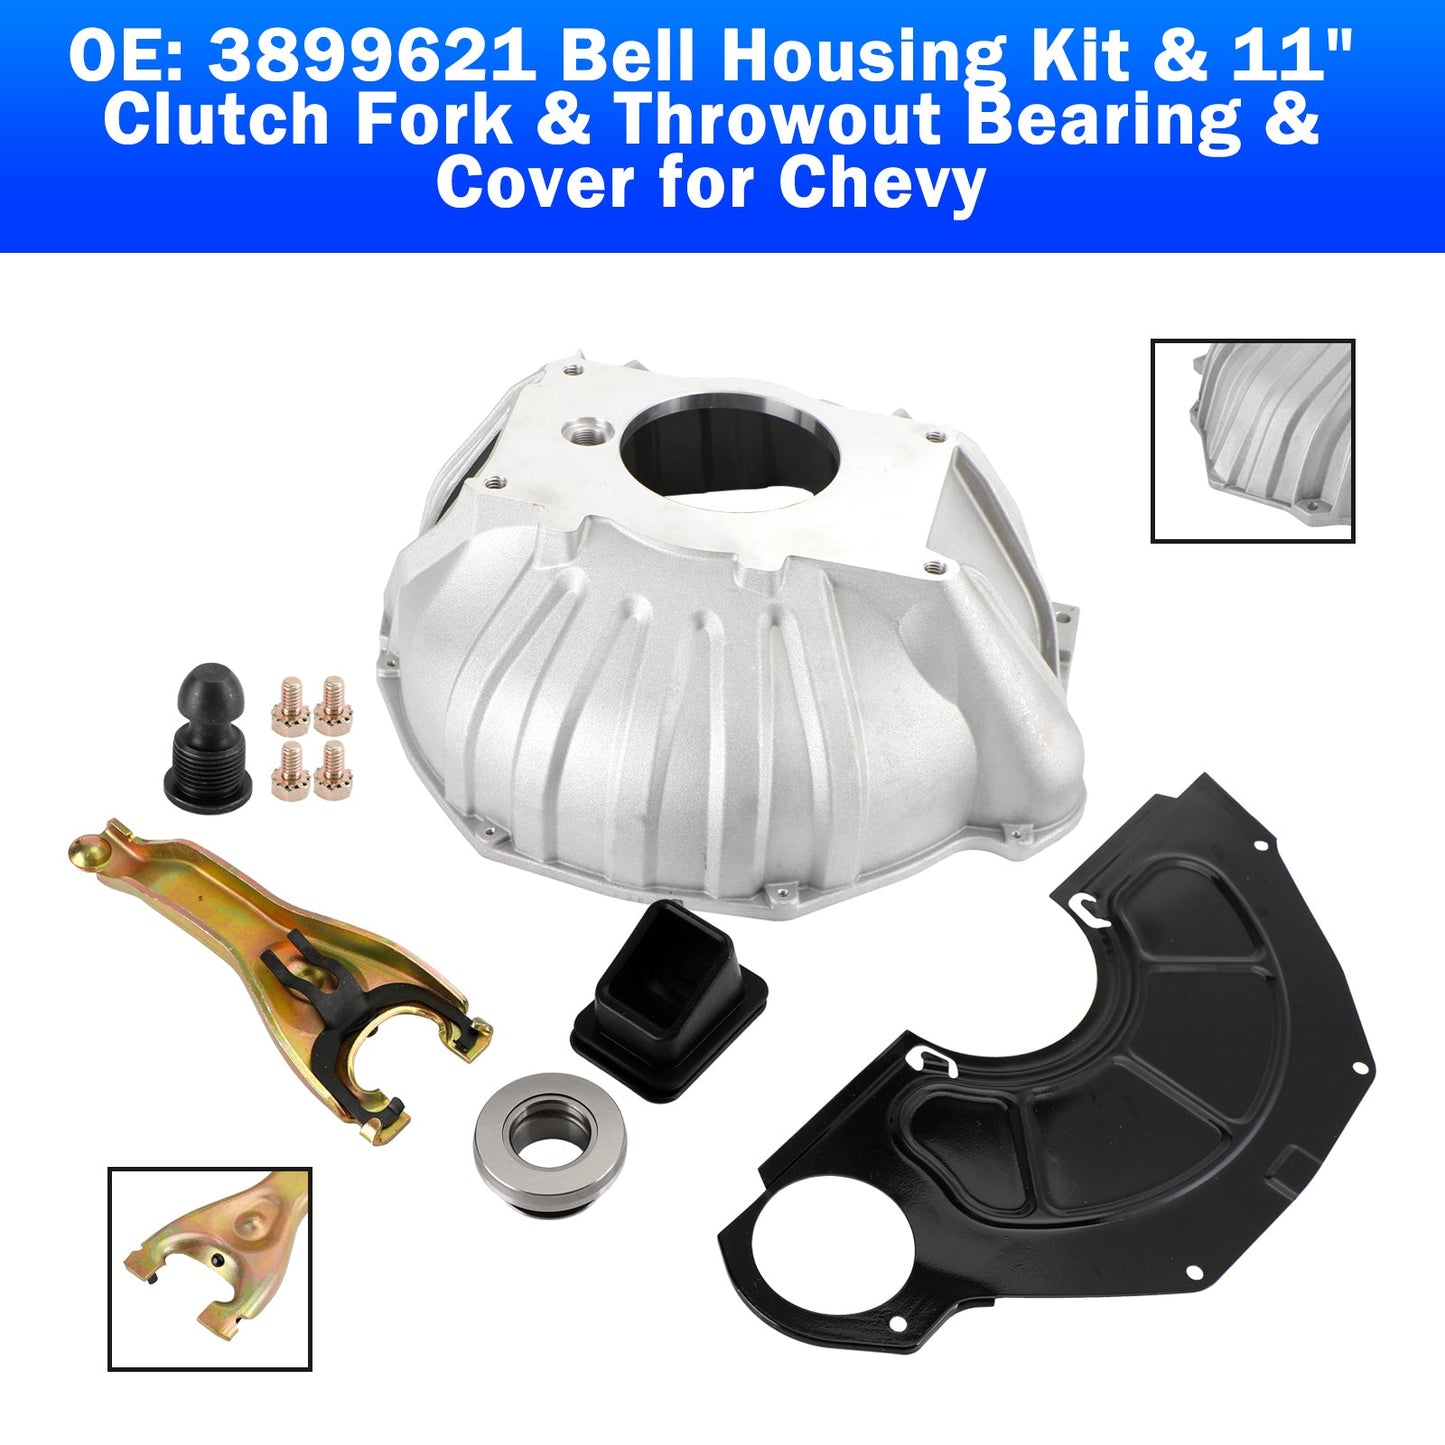 3899621 Bell Housing Kit & 11" Clutch Fork & Throwout Bearing & Cover for Chevy